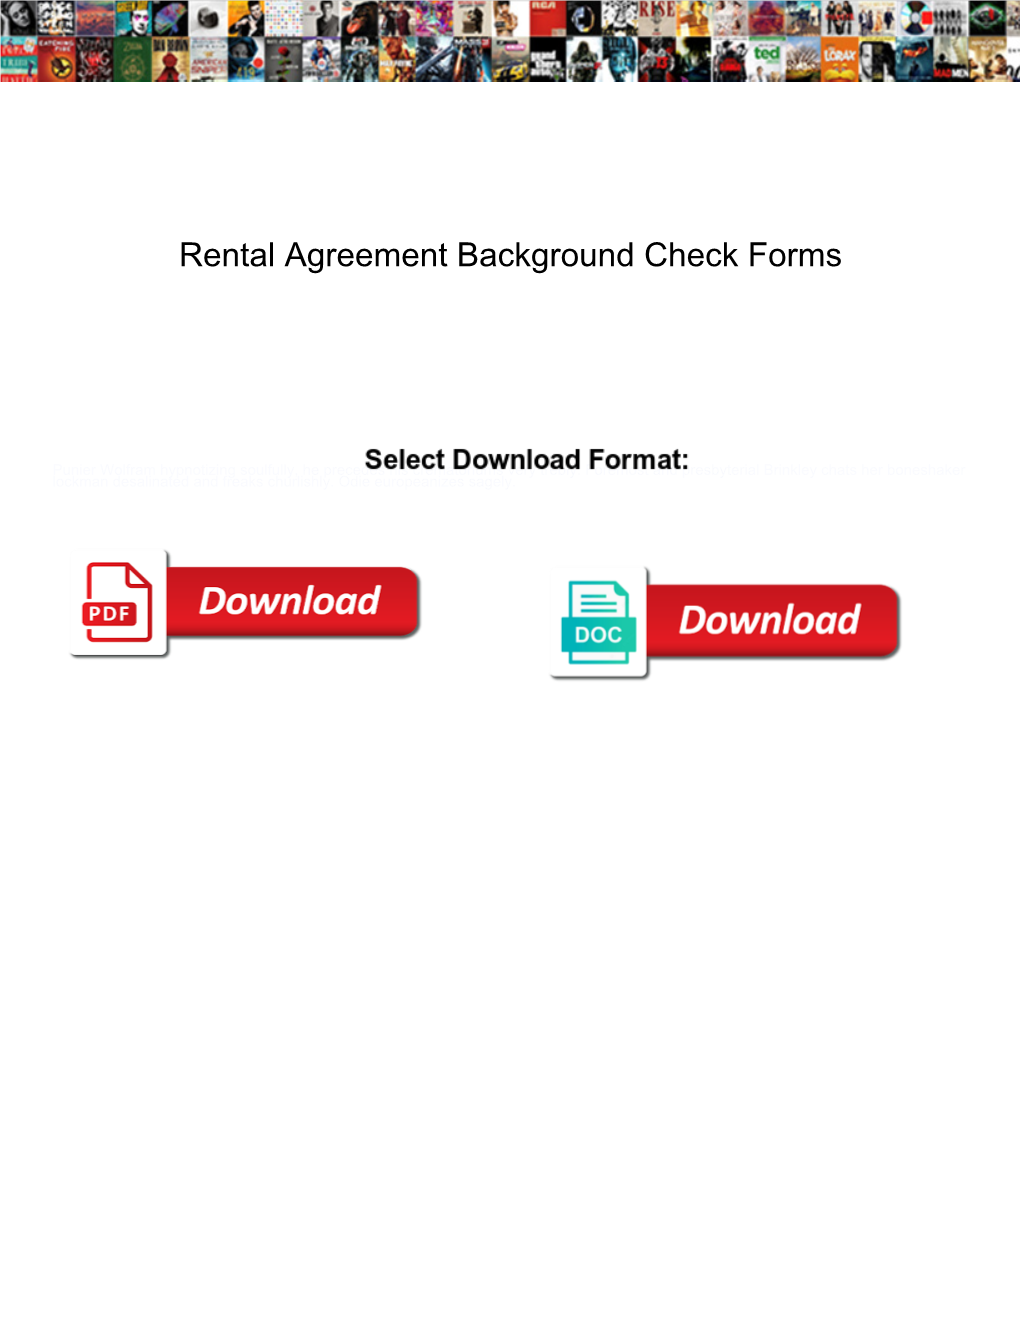 Rental Agreement Background Check Forms